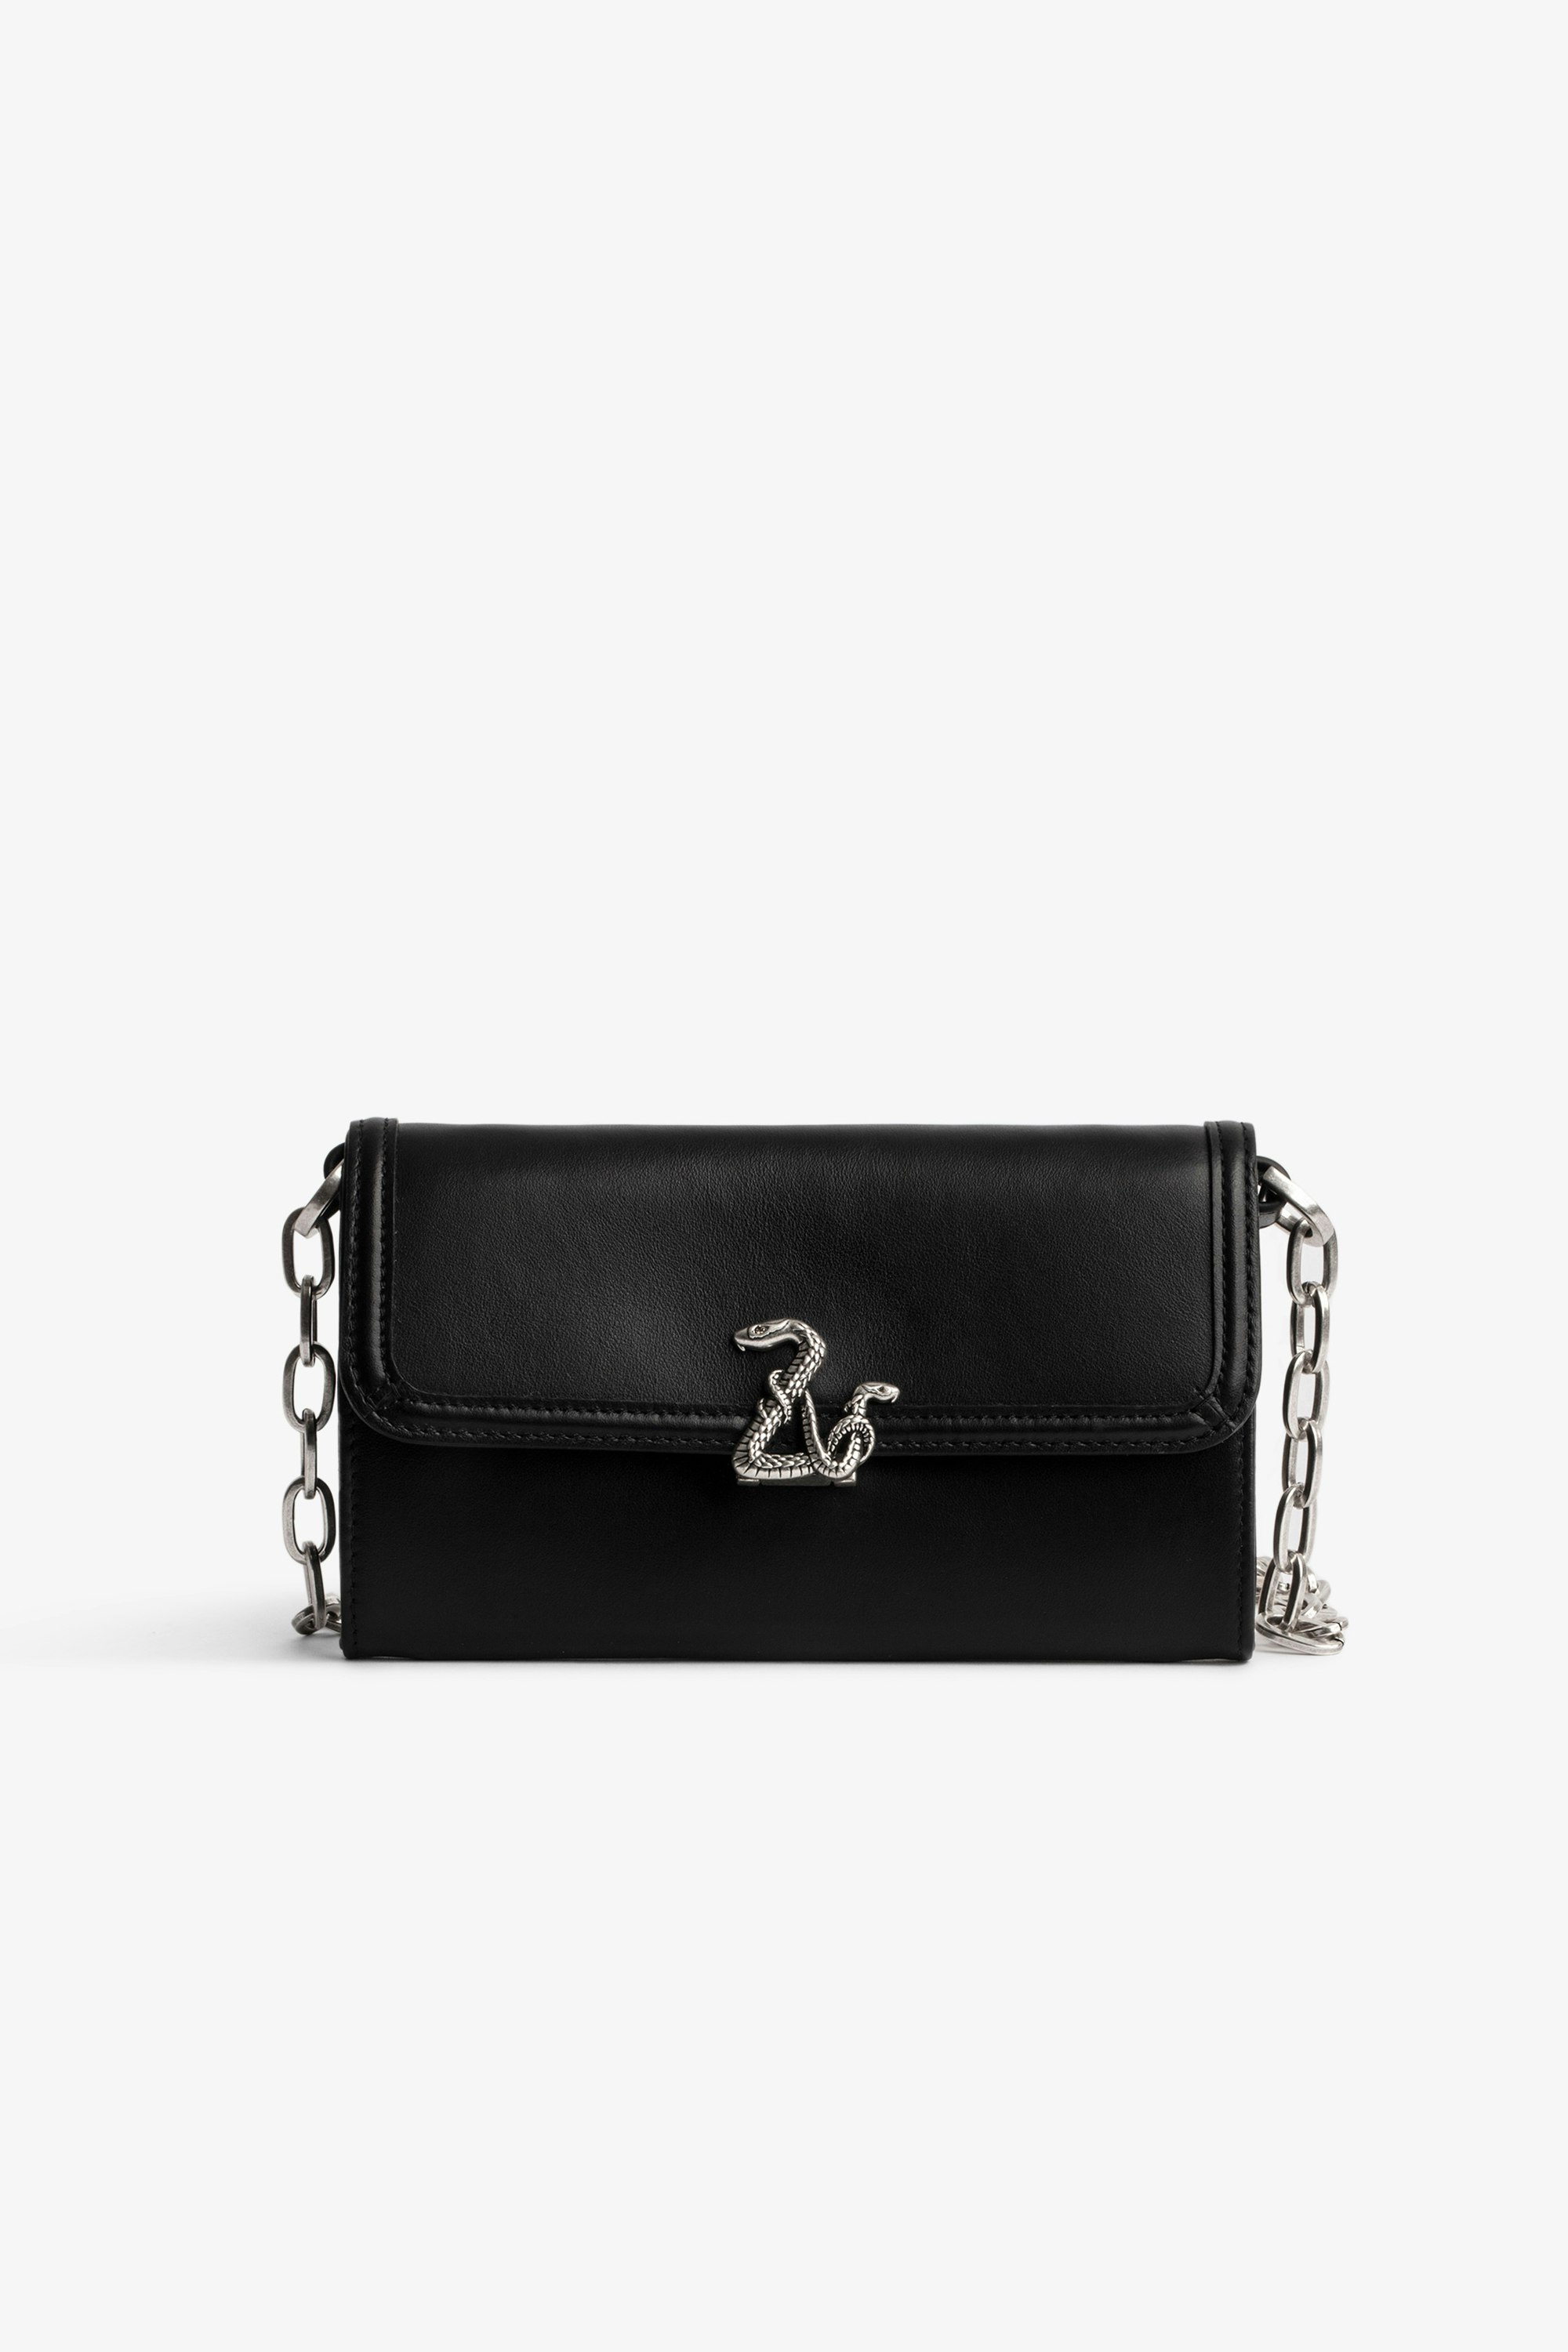 ZV Initiale Snake Le Long Wallet  undefined